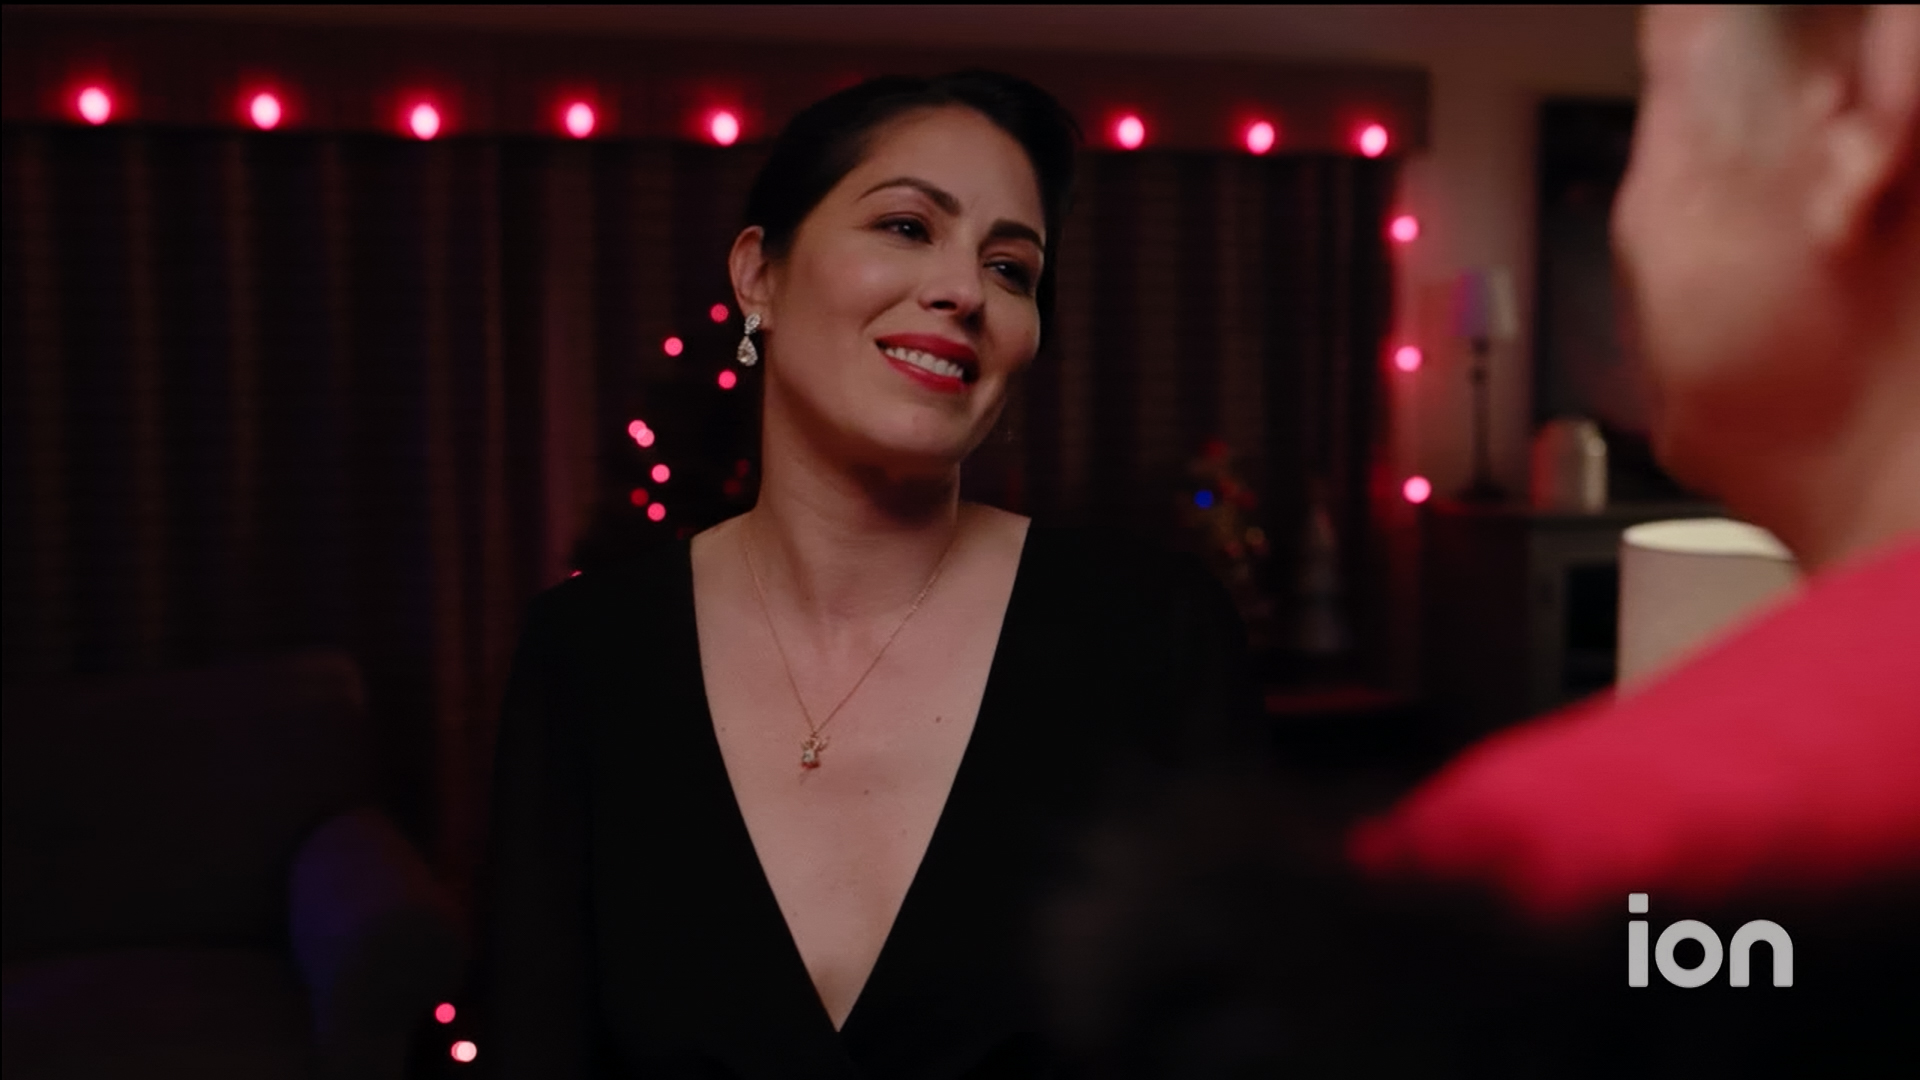 frame of actor Michelle Borth from the ION movie 'the Christmas Thief' by cinematographer Jason Kraynek